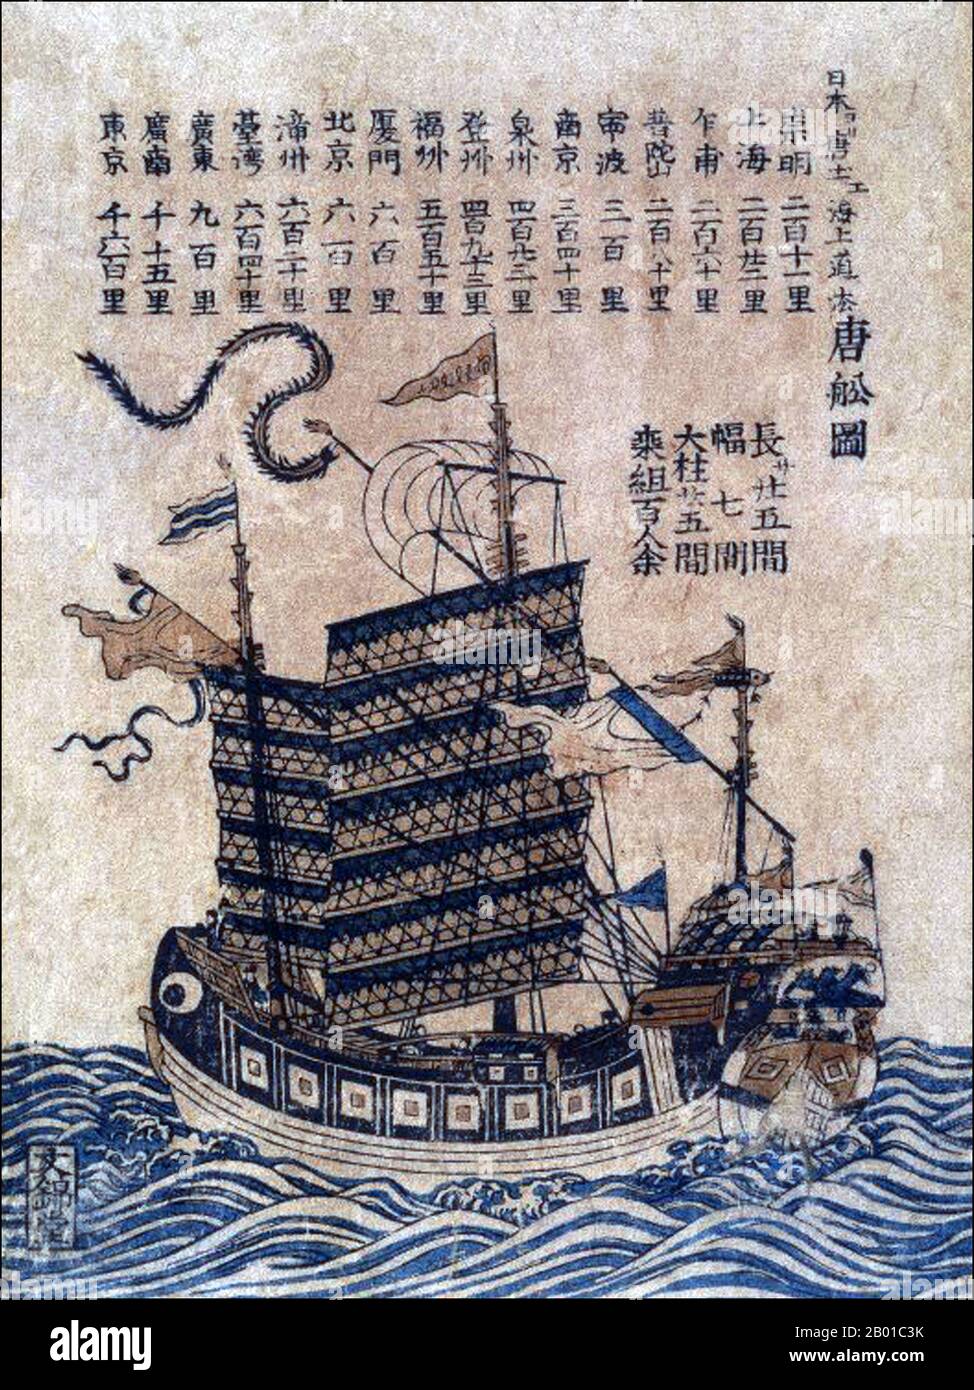 China: An ocean-going junk (Tosen Zu) with listings of the sea route from China to Japan. Woodcut print, c. 1847-1853..  A junk is an ancient Chinese sailing vessel design still in use today. Junks were developed during the Han Dynasty (206 BC–220 AD) and were used as sea-going vessels as early as the 2nd century AD. They evolved in the later dynasties, and were used throughout Asia for extensive ocean voyages. They were found, and in lesser numbers are still found, throughout Southeast Asia and India, but primarily in China, perhaps most famously in Hong Kong. Stock Photo